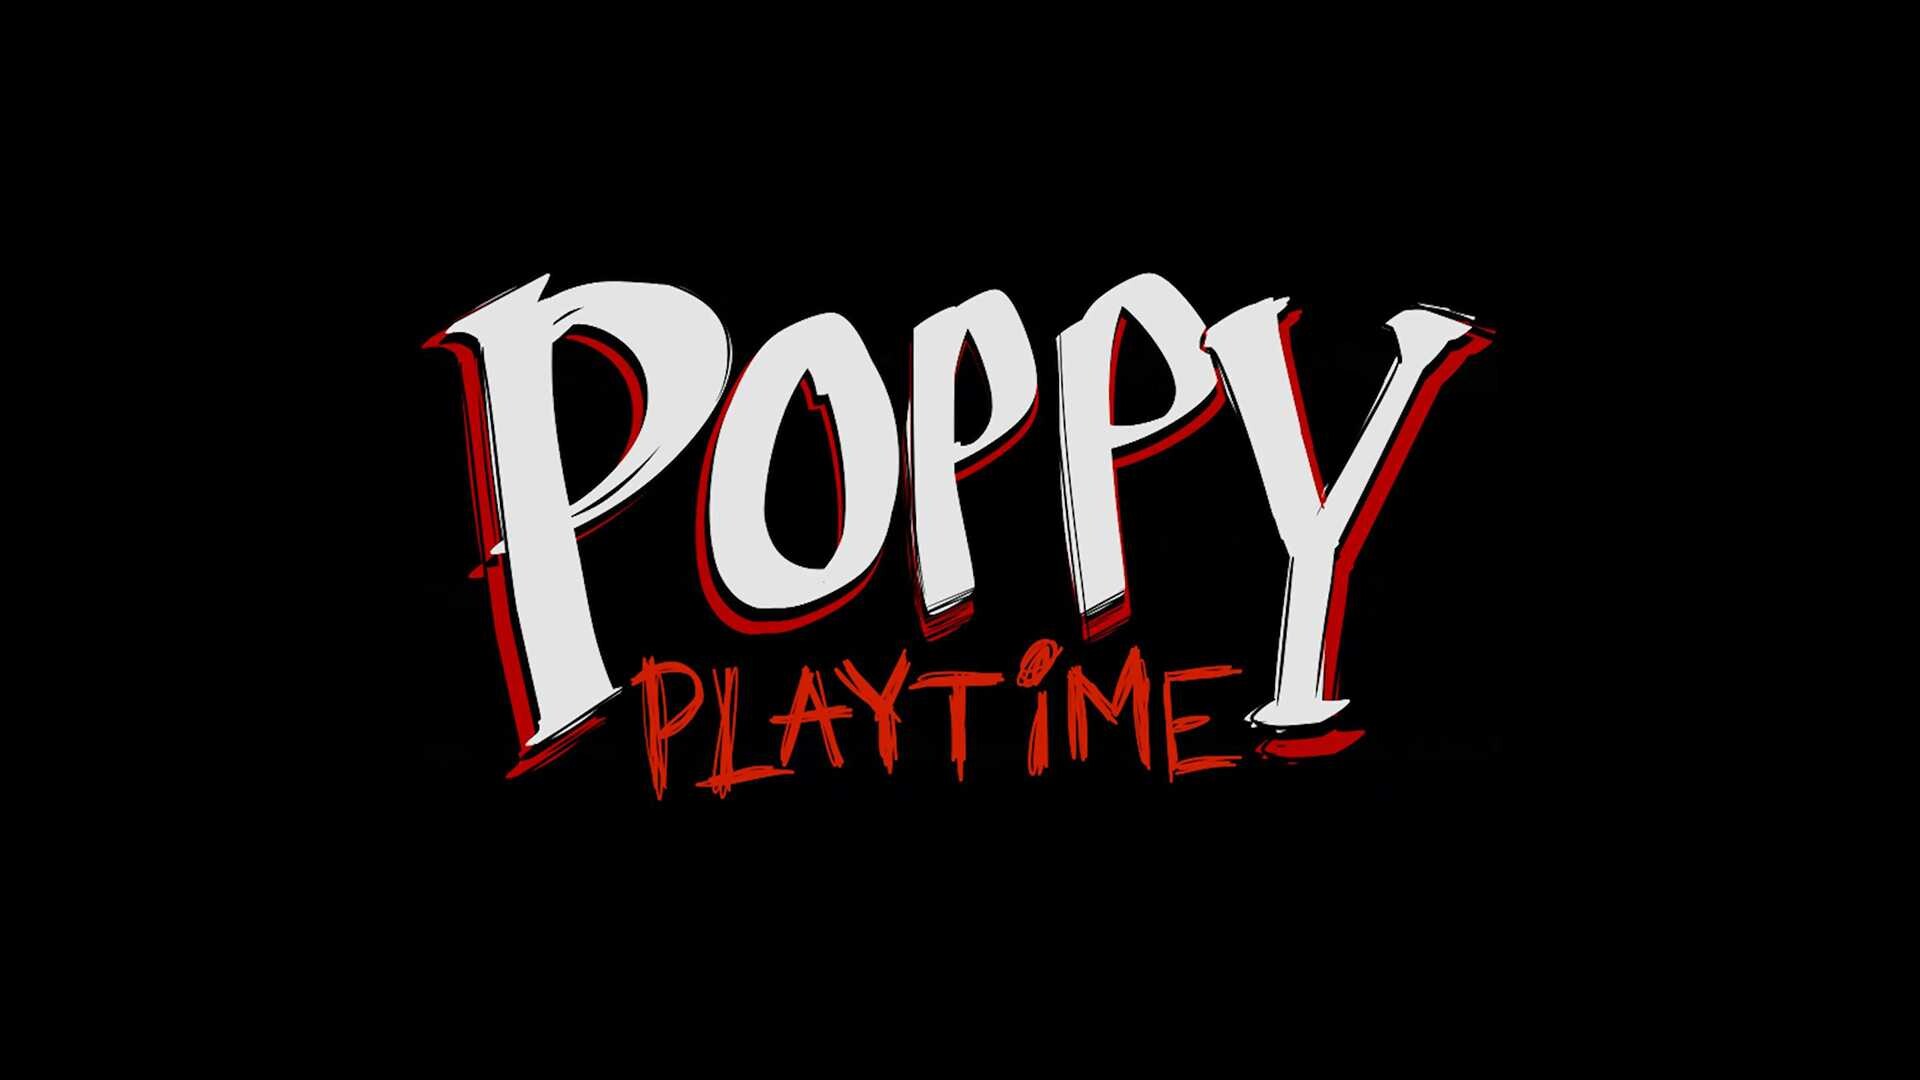 Poppy Playtime: Developers, Ben Pavlovits, Isaac Christopherson, MOB Games, Staying alive in this horror/puzzle adventure. 1920x1080 Full HD Background.